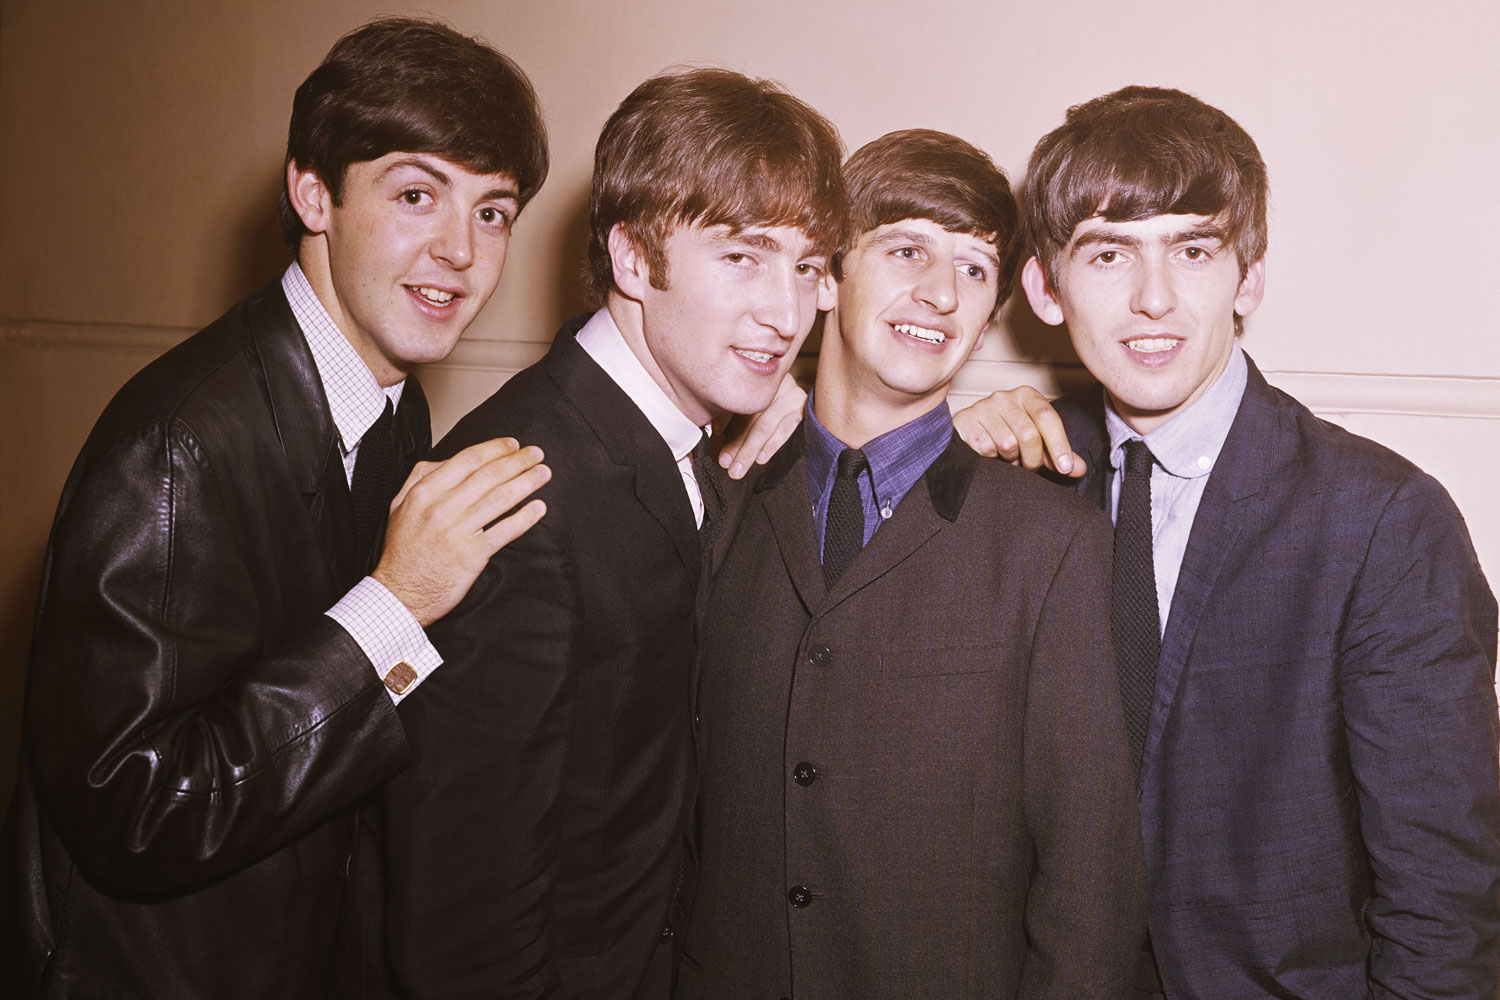 CIRCA 1964: Rock and roll band Beatles pose for a portrait in circa 1964. (L-R) Paul McCartney, John Lennon, Ringo Starr, George Harrison. (Photo by Michael Ochs Archives/Getty Images)